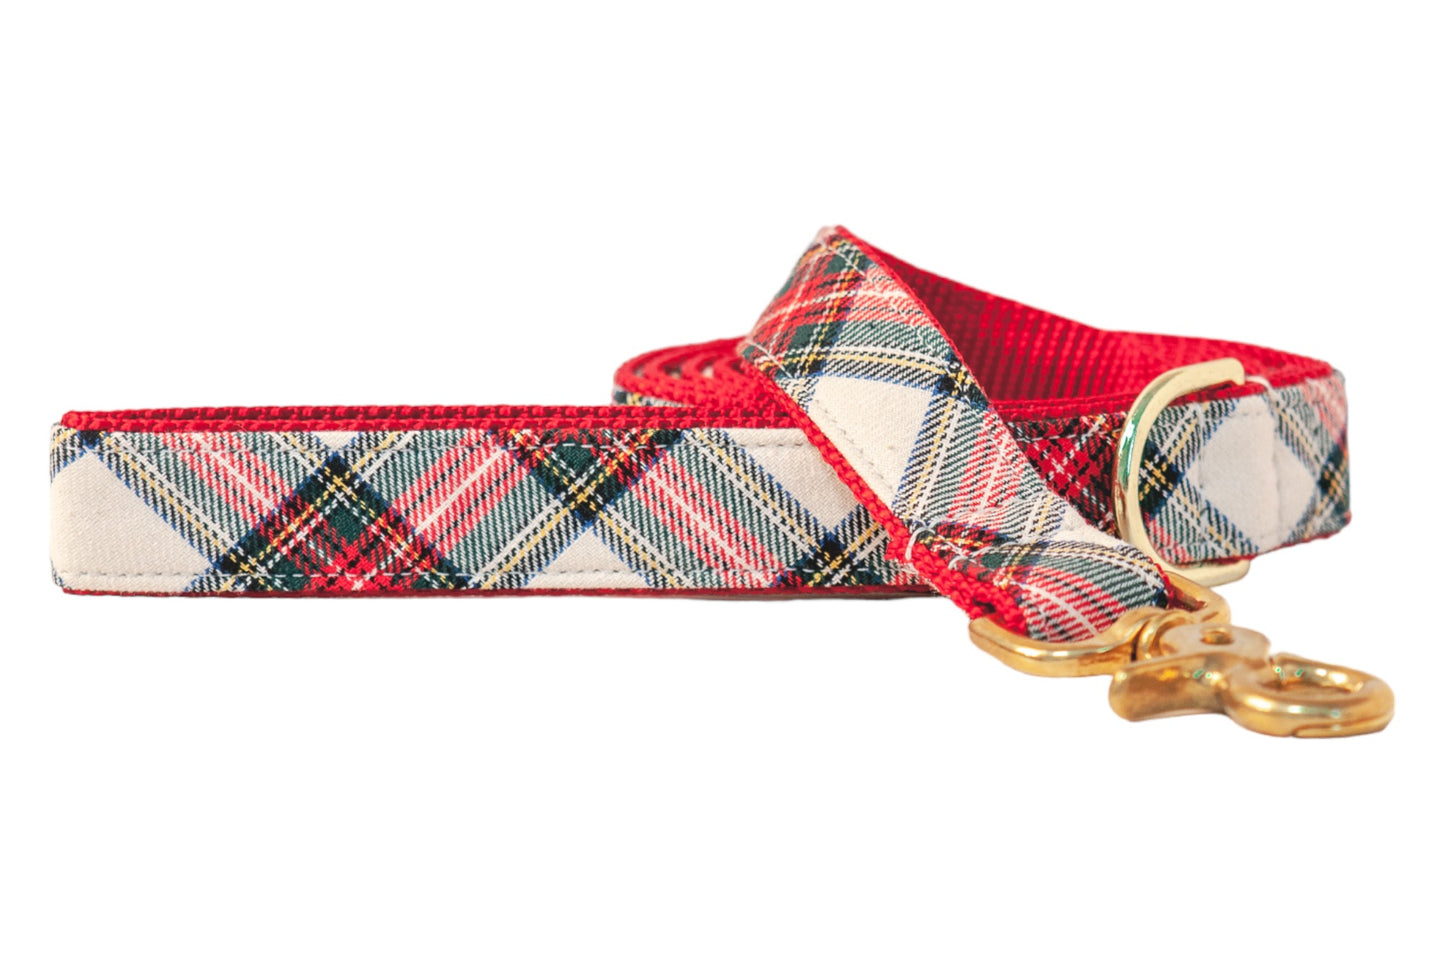 Ellie's Plaid on Red Matching Leash - Crew LaLa